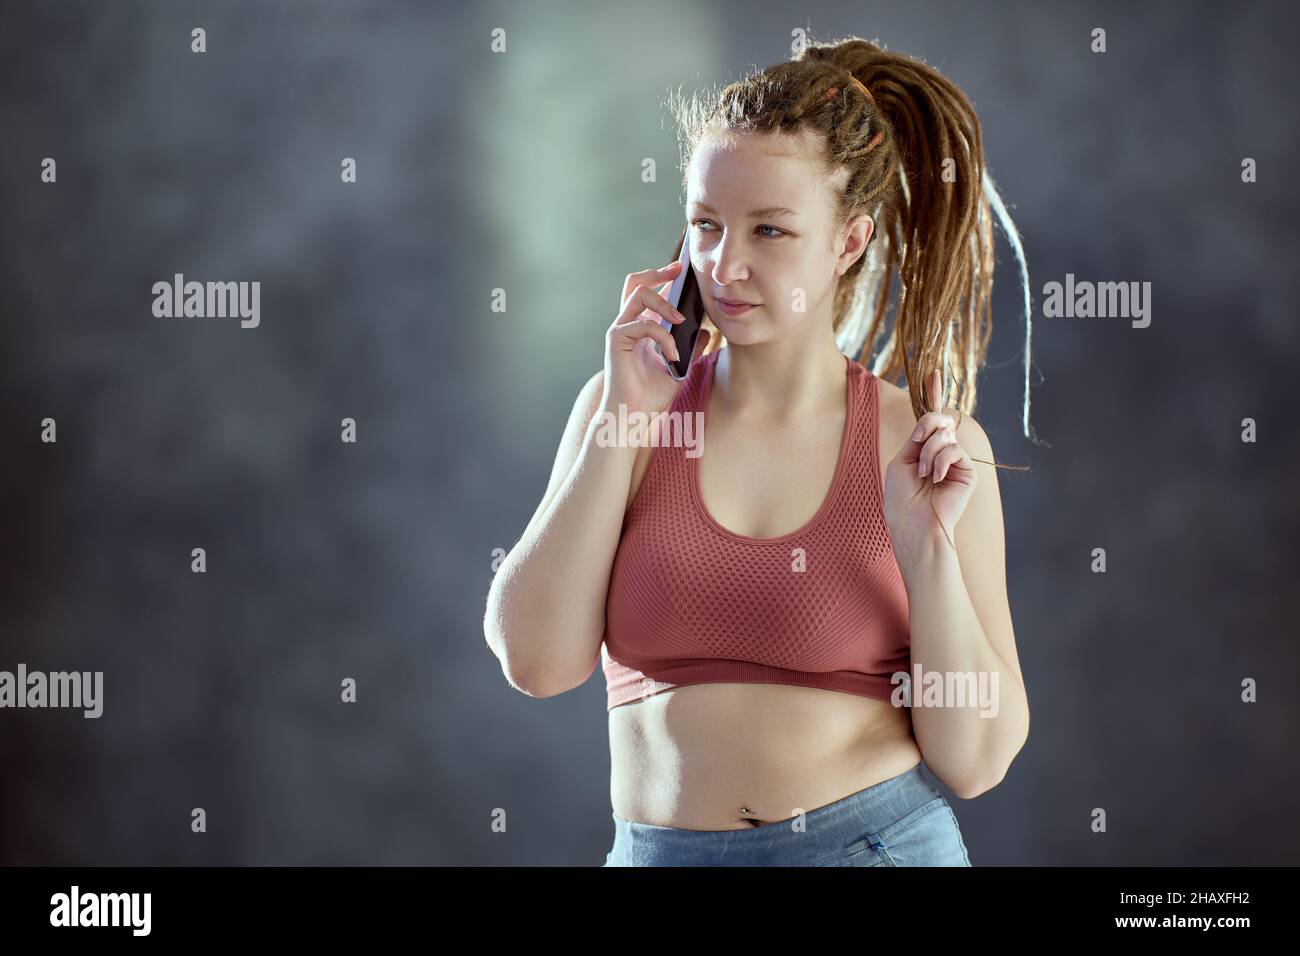 Caucasian woman with braided hair speaks on telephone. Stock Photo